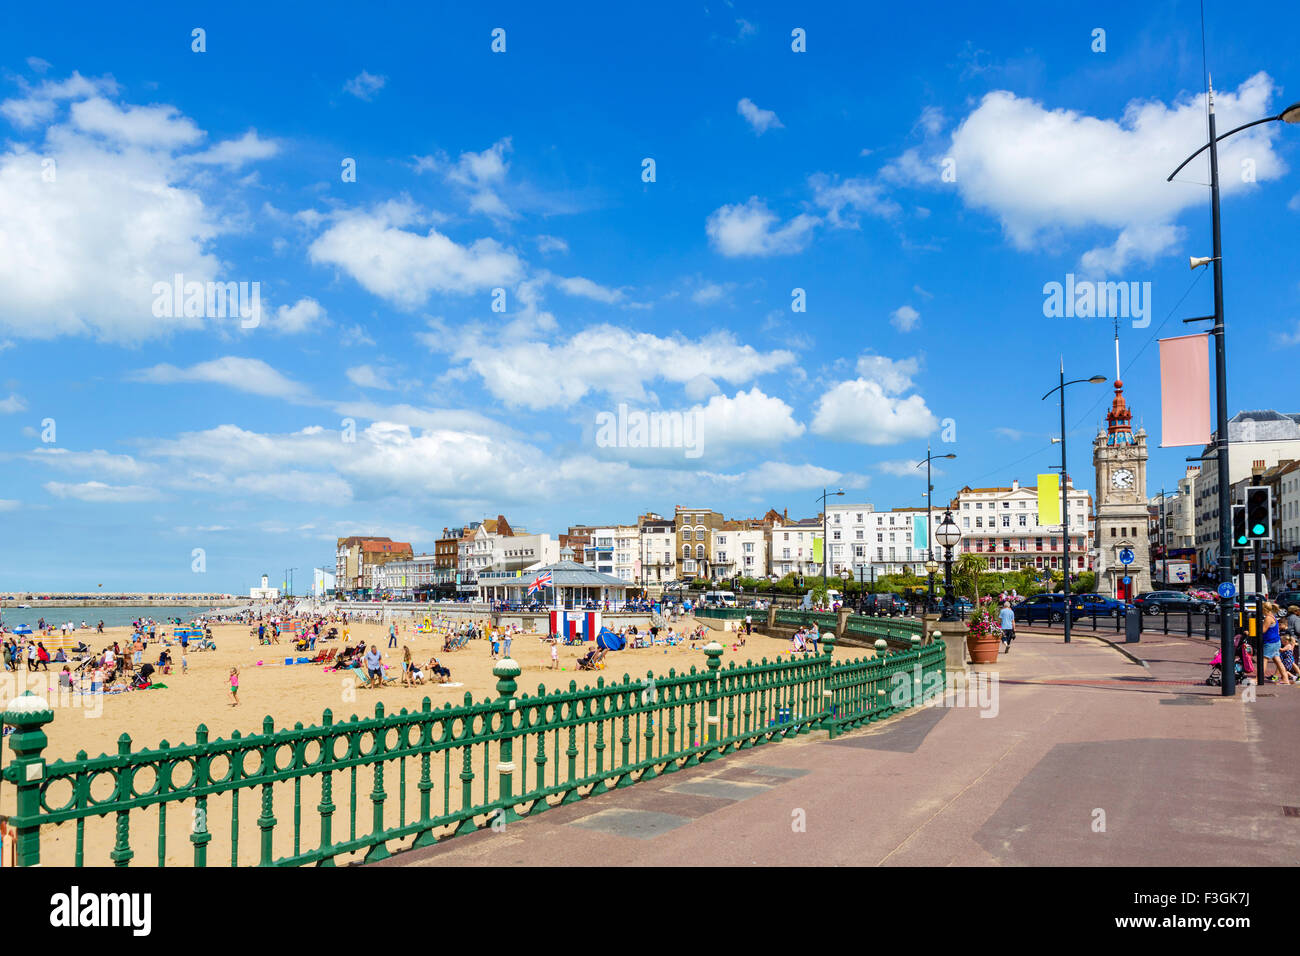 The promenade and beach in Margate, Kent, England, UK Stock Photo